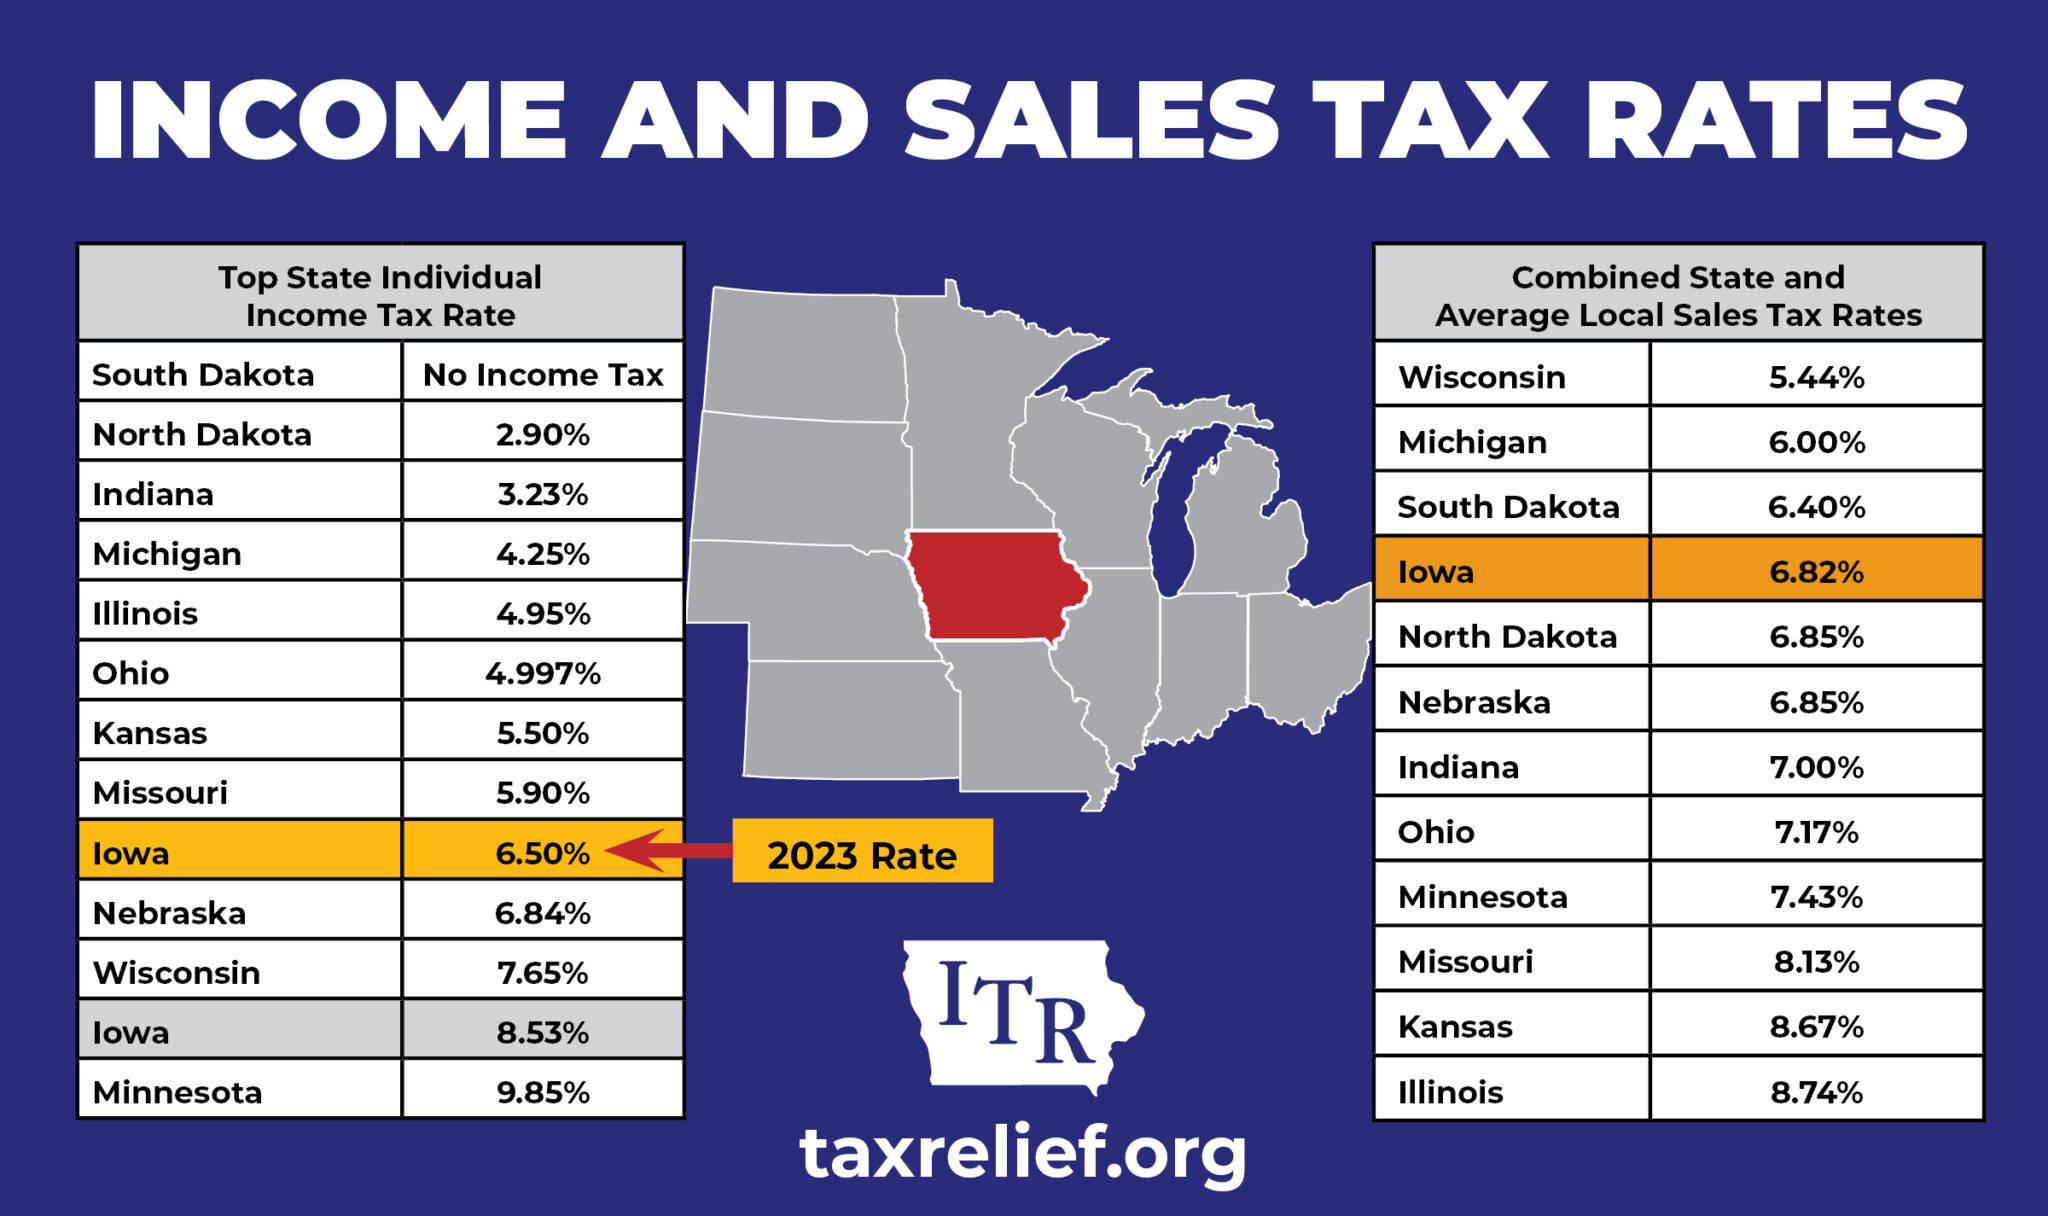 state-individual-income-tax-rates-2000-2018-tax-policy-center